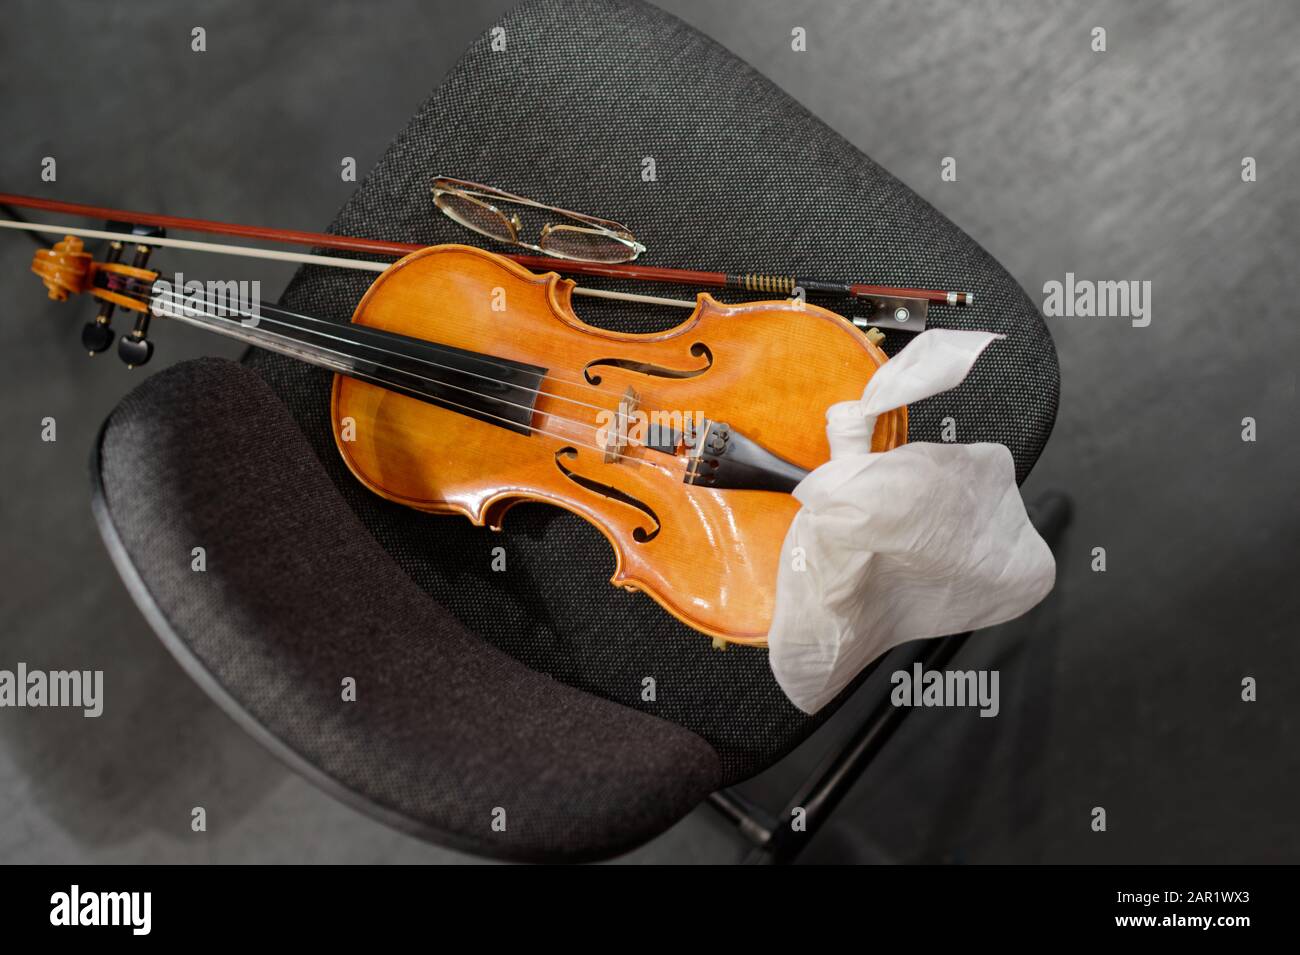 Musical instruments: violin and bow on the musician's chair Stock Photo